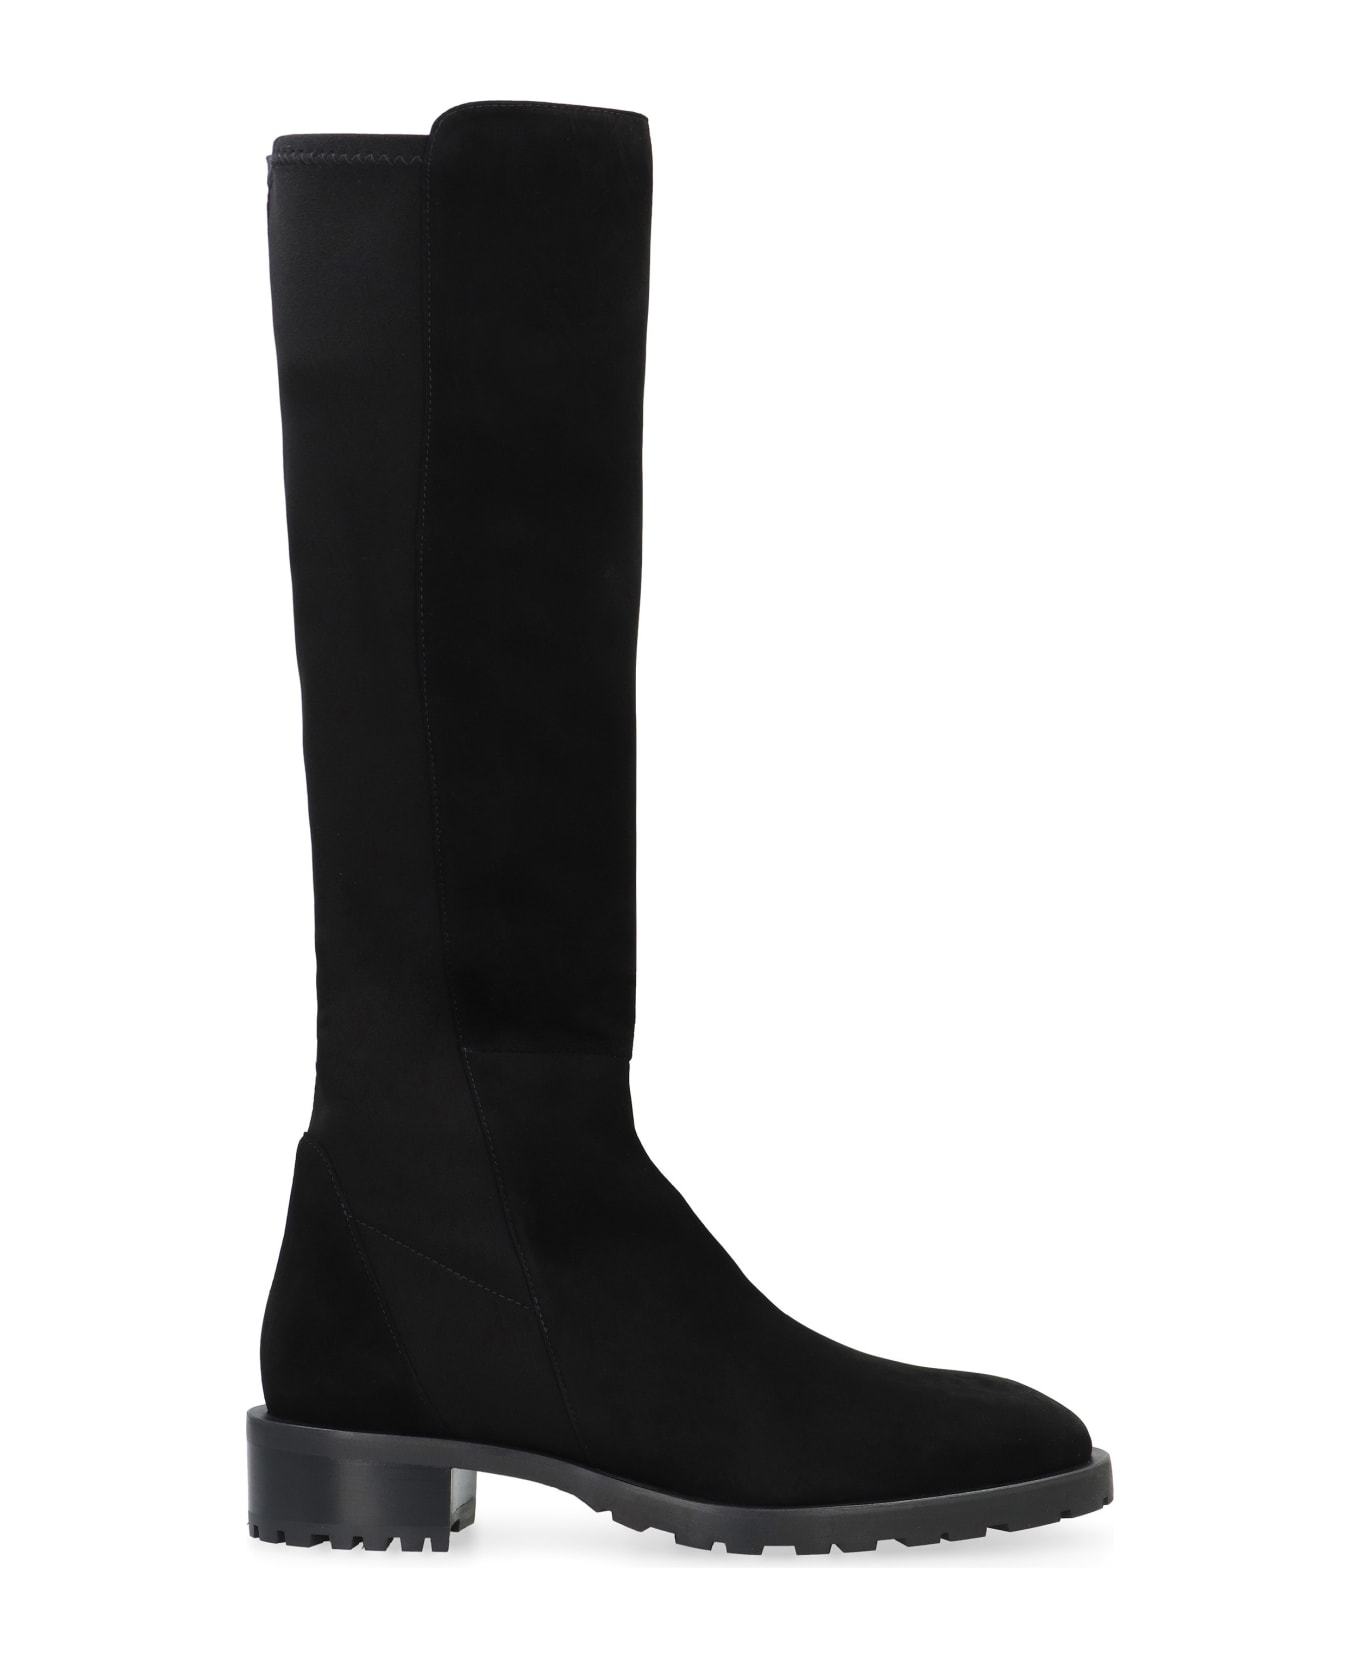 Stuart Weitzman 5050 Leather And Stretch Fabric Boots - black